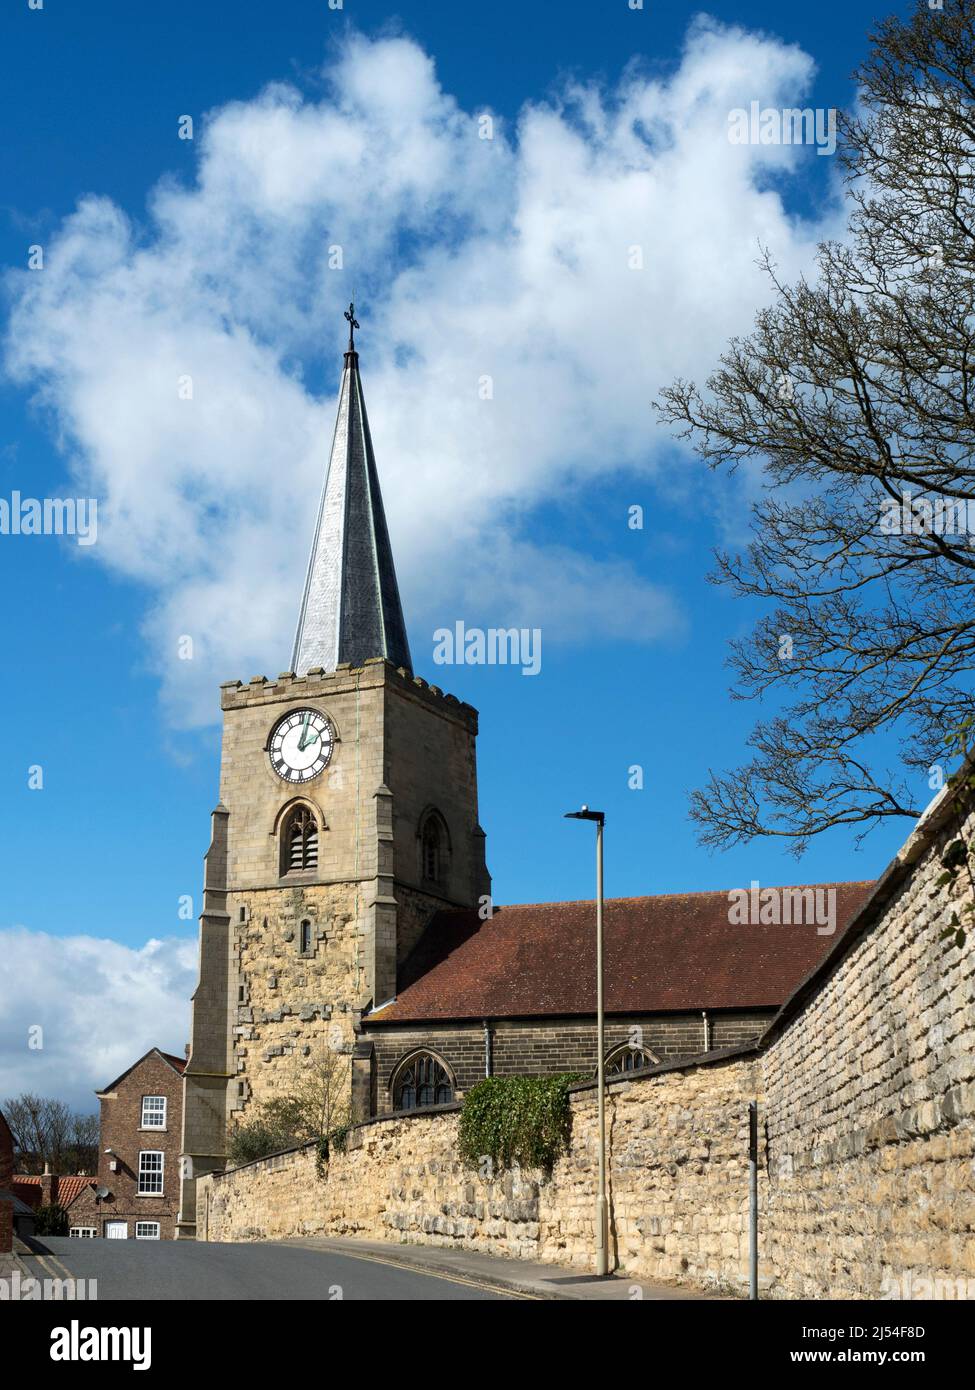 Roman Catholic Church of St Leonard and St Mary a grade II* listed building in Malton North Yorkshire England Stock Photo